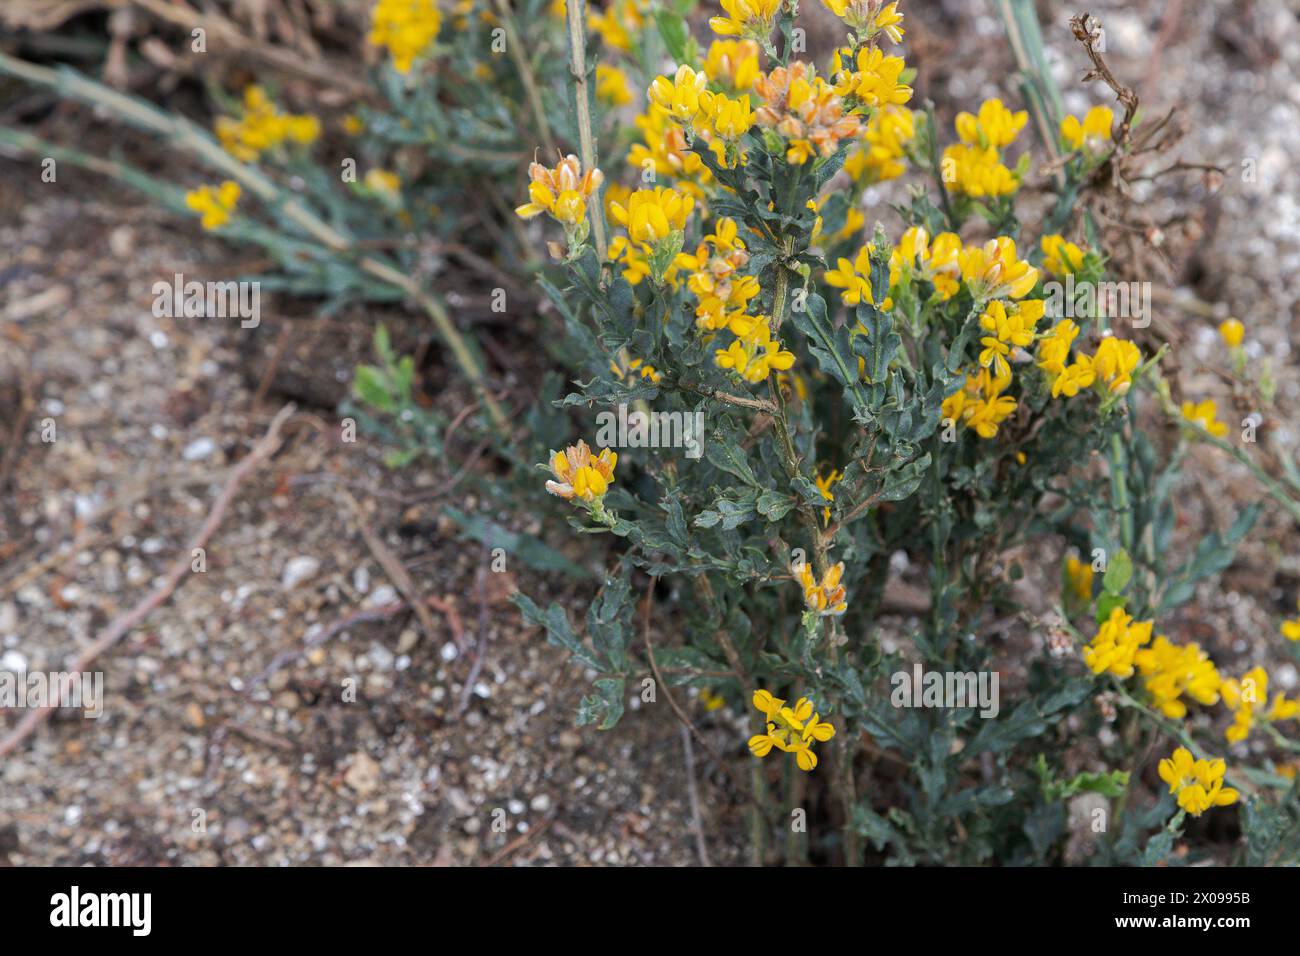 Baccharis trimera or genista tridentata, known as carqueija flower, spontaneous yellow flower widely found in the Iberian Peninsula from wastelands us Stock Photo